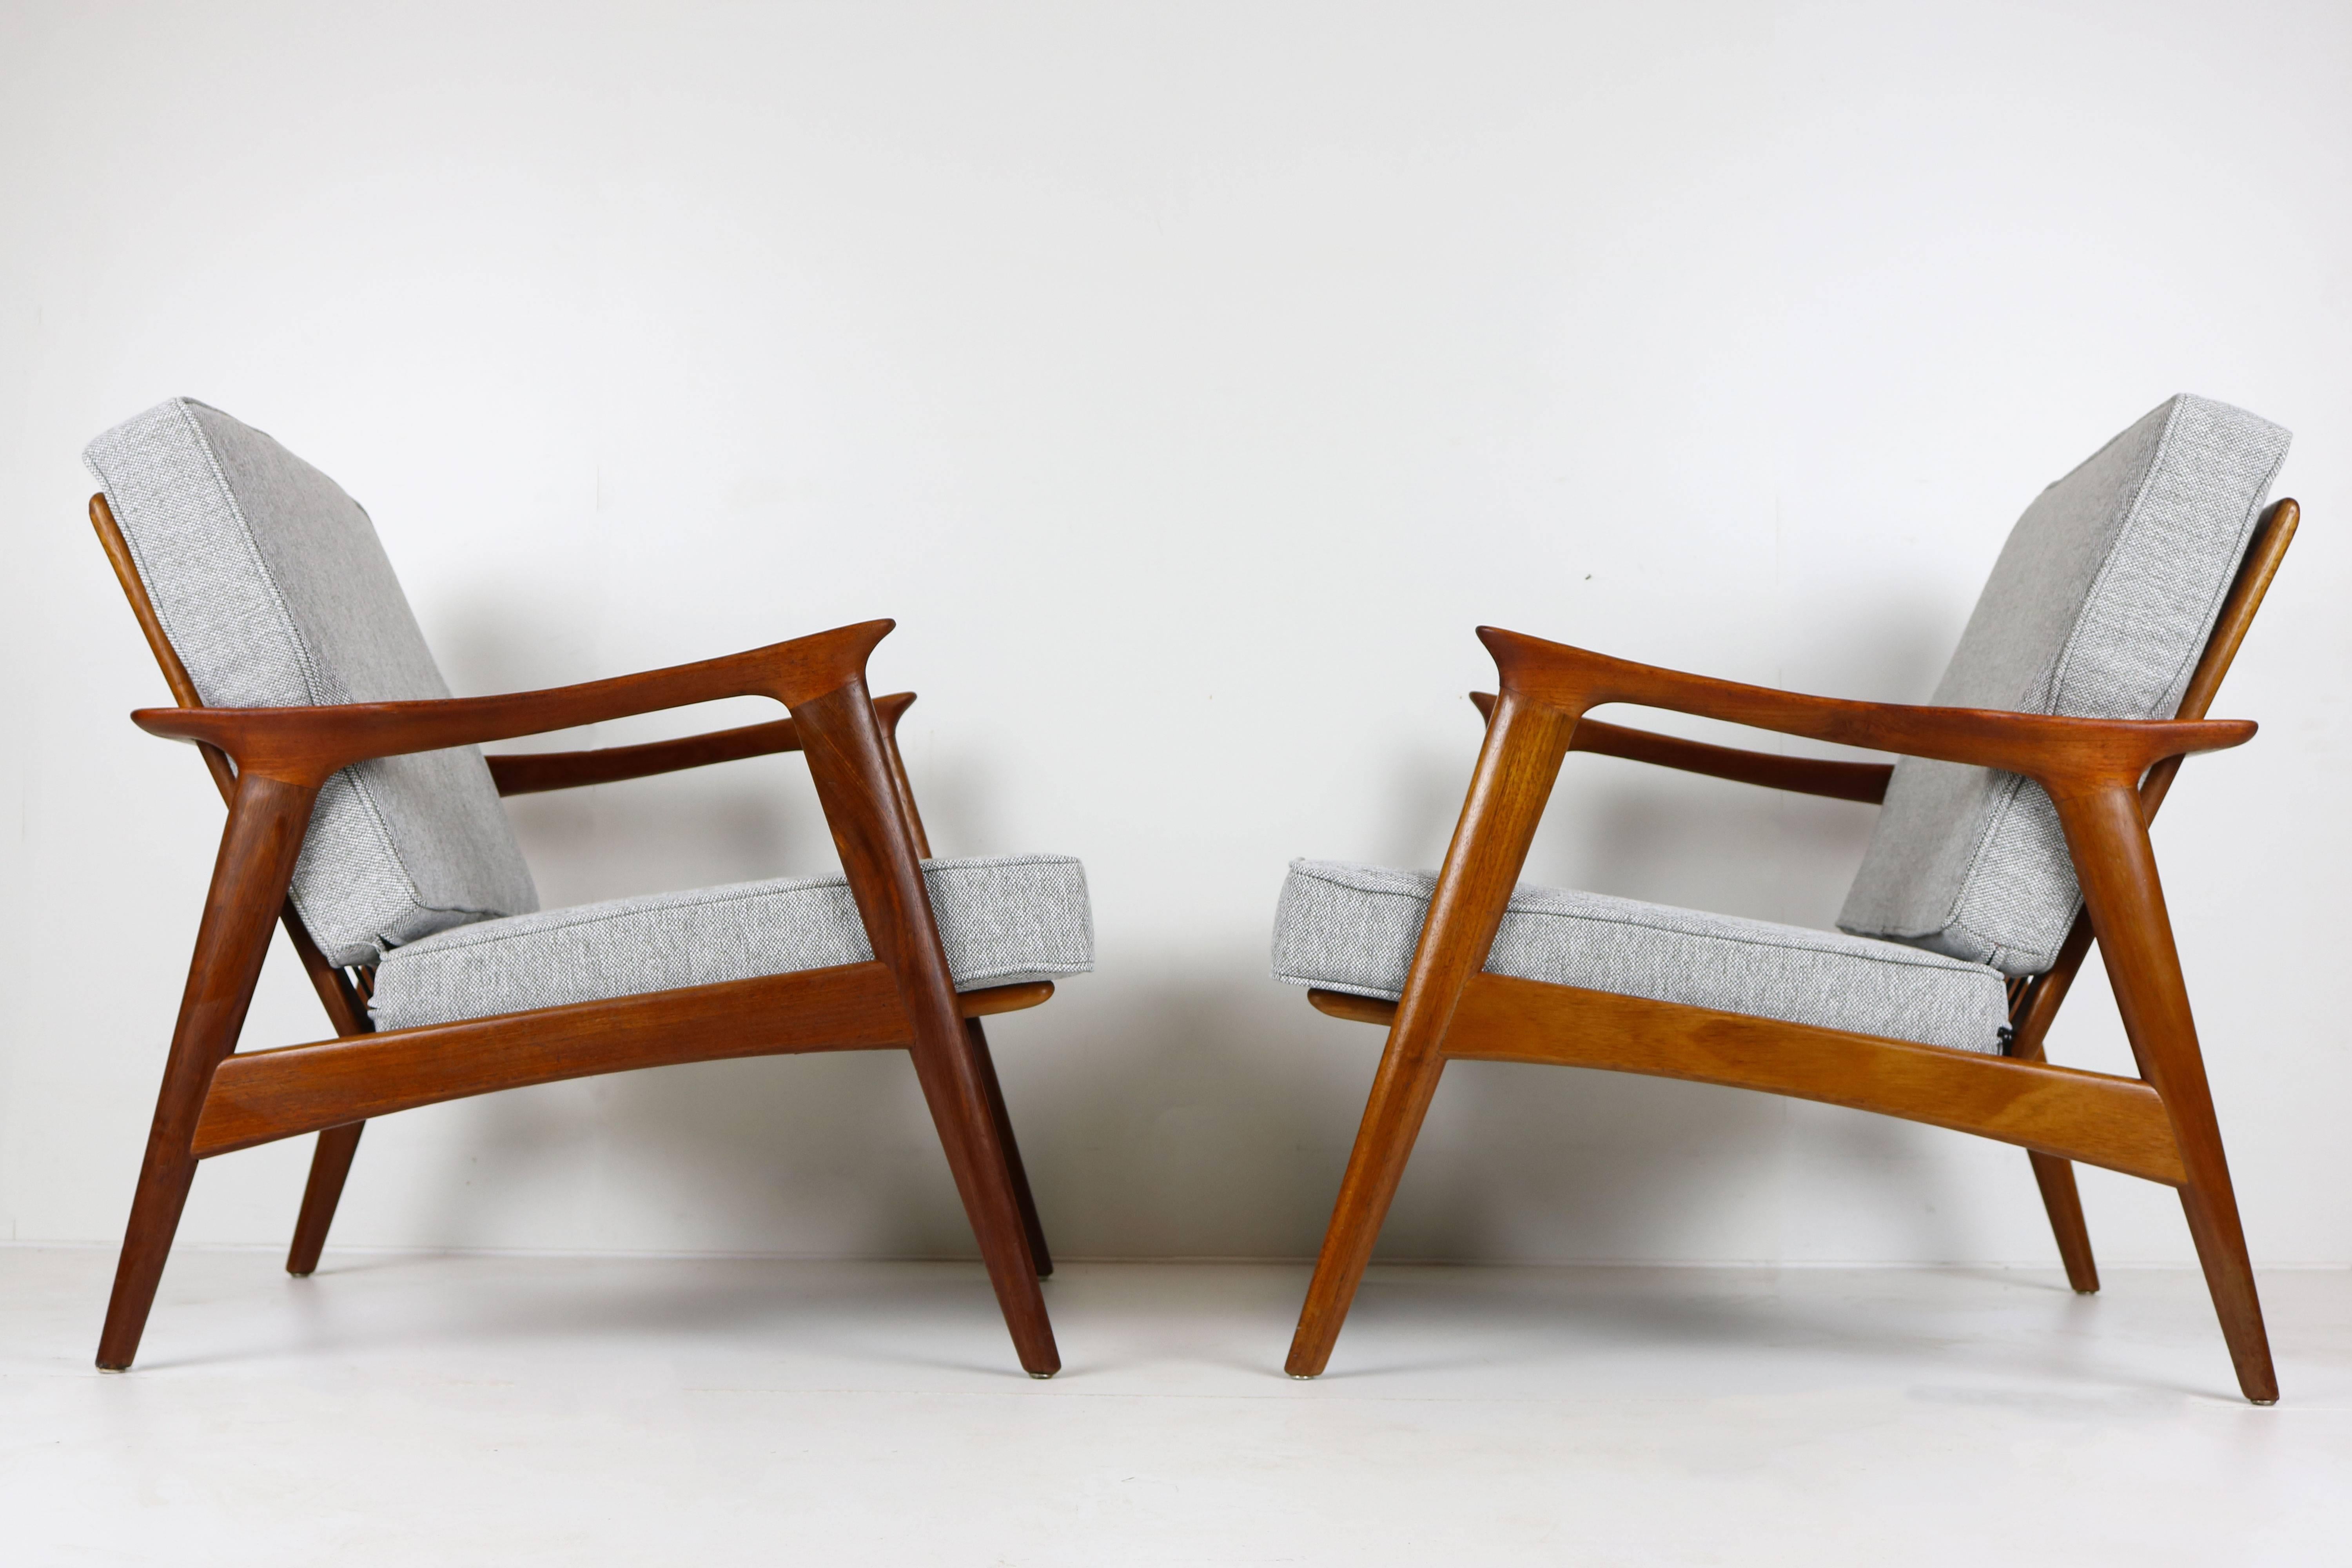 Wonderful and rare pair of sculpted teak lounge chairs from Norway attributed to Fredrik Kayser 1950s. This pair of very comfortable lounge chairs have a unique design, the armrests go all the way around the back and are made of sculpted solid teak